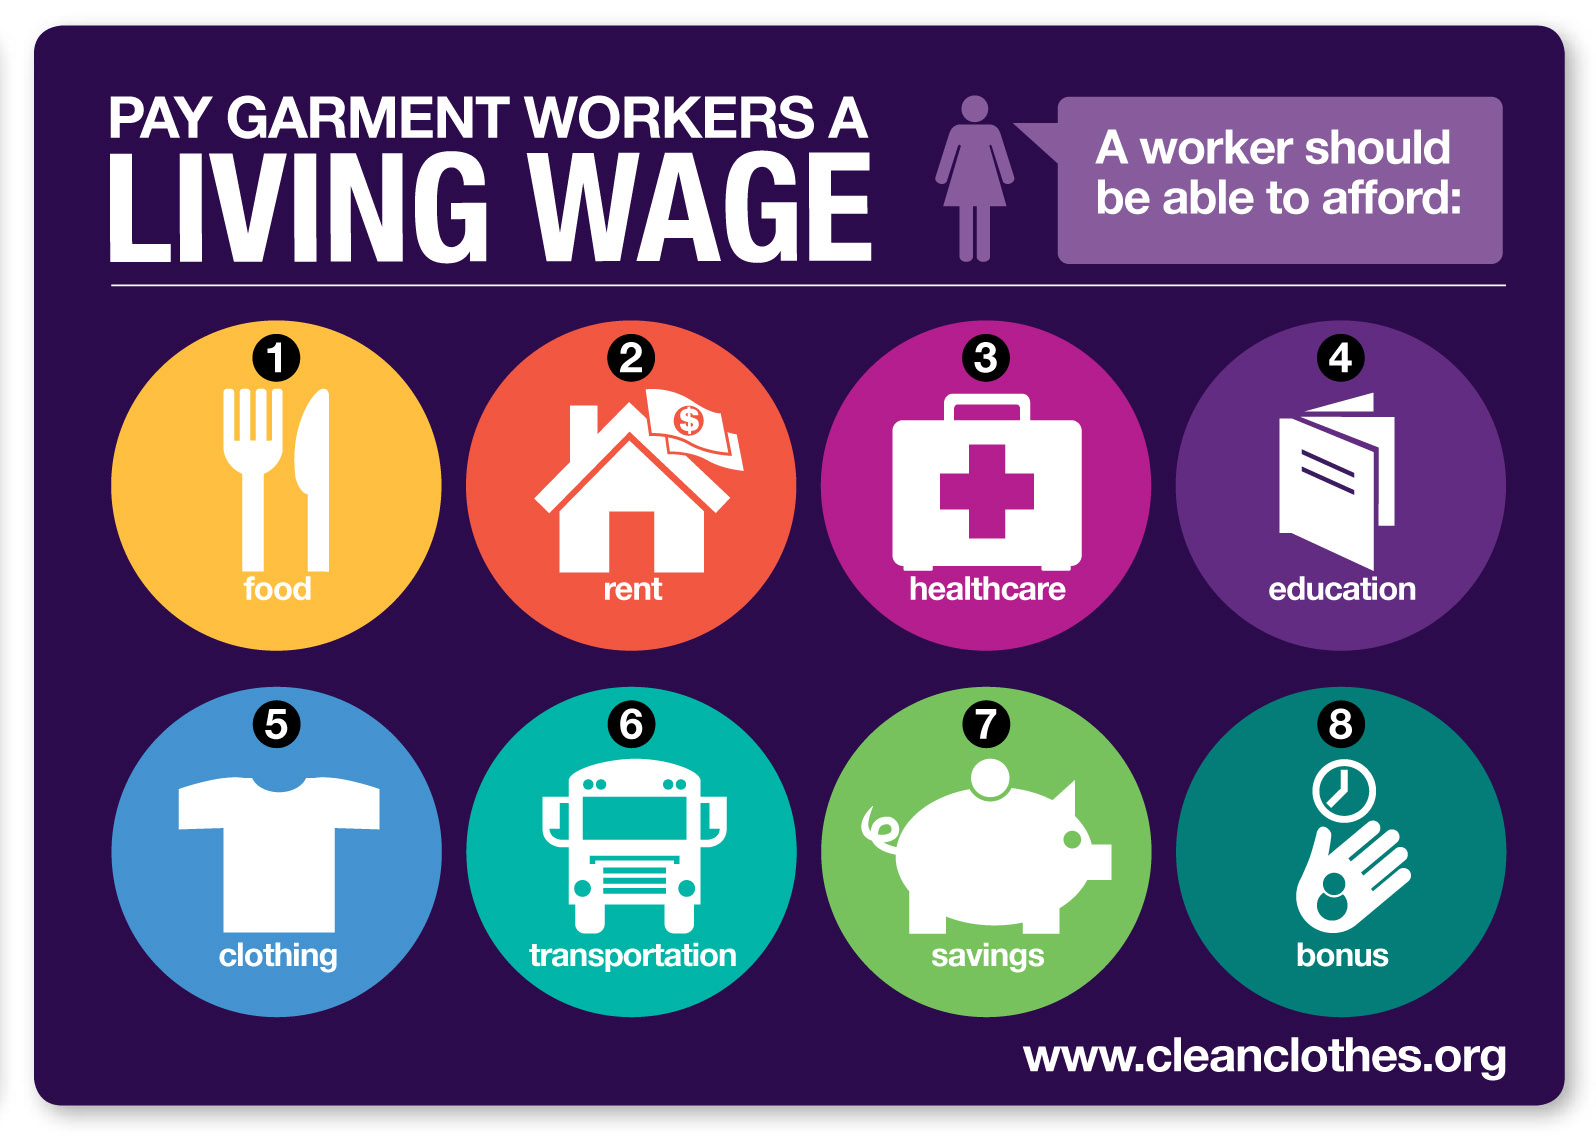 Earn her living. Living wage. Living wage Movements. Pay for Living. Earning a Living wage.